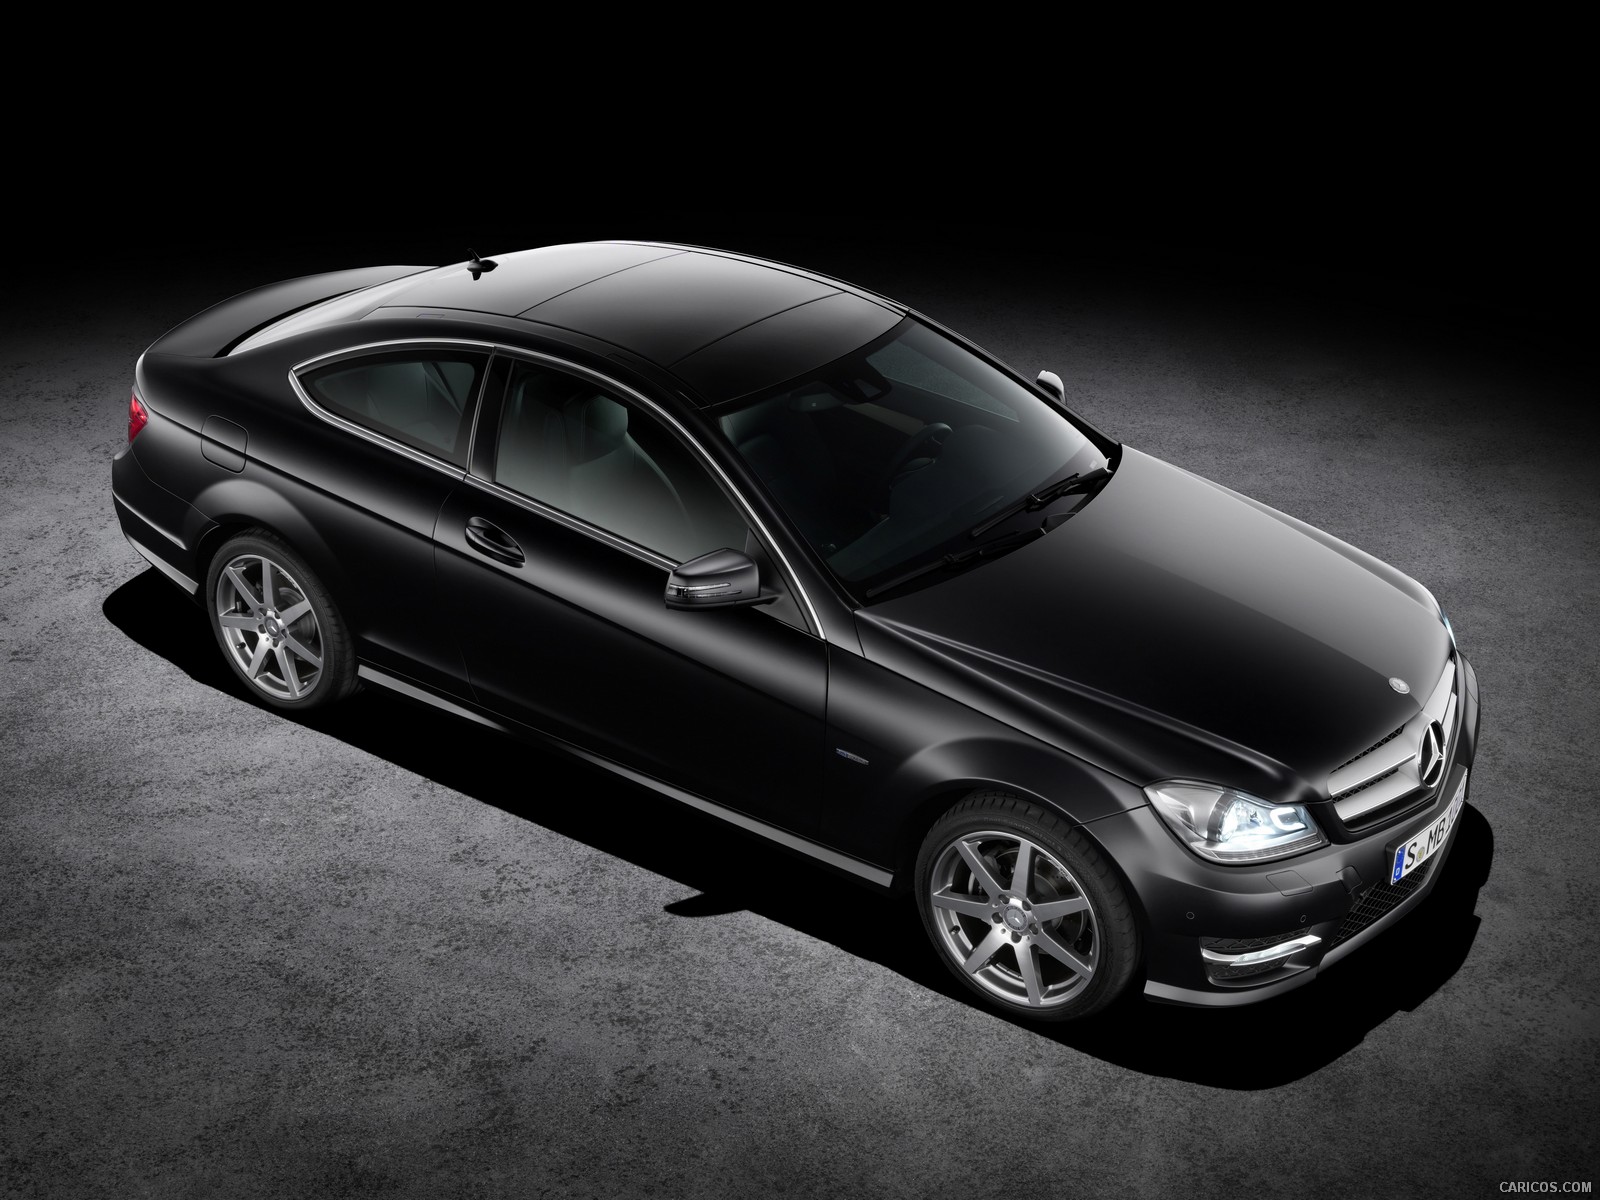 Mercedes-Benz C-Class Coupe (2012)  - Top, #25 of 79